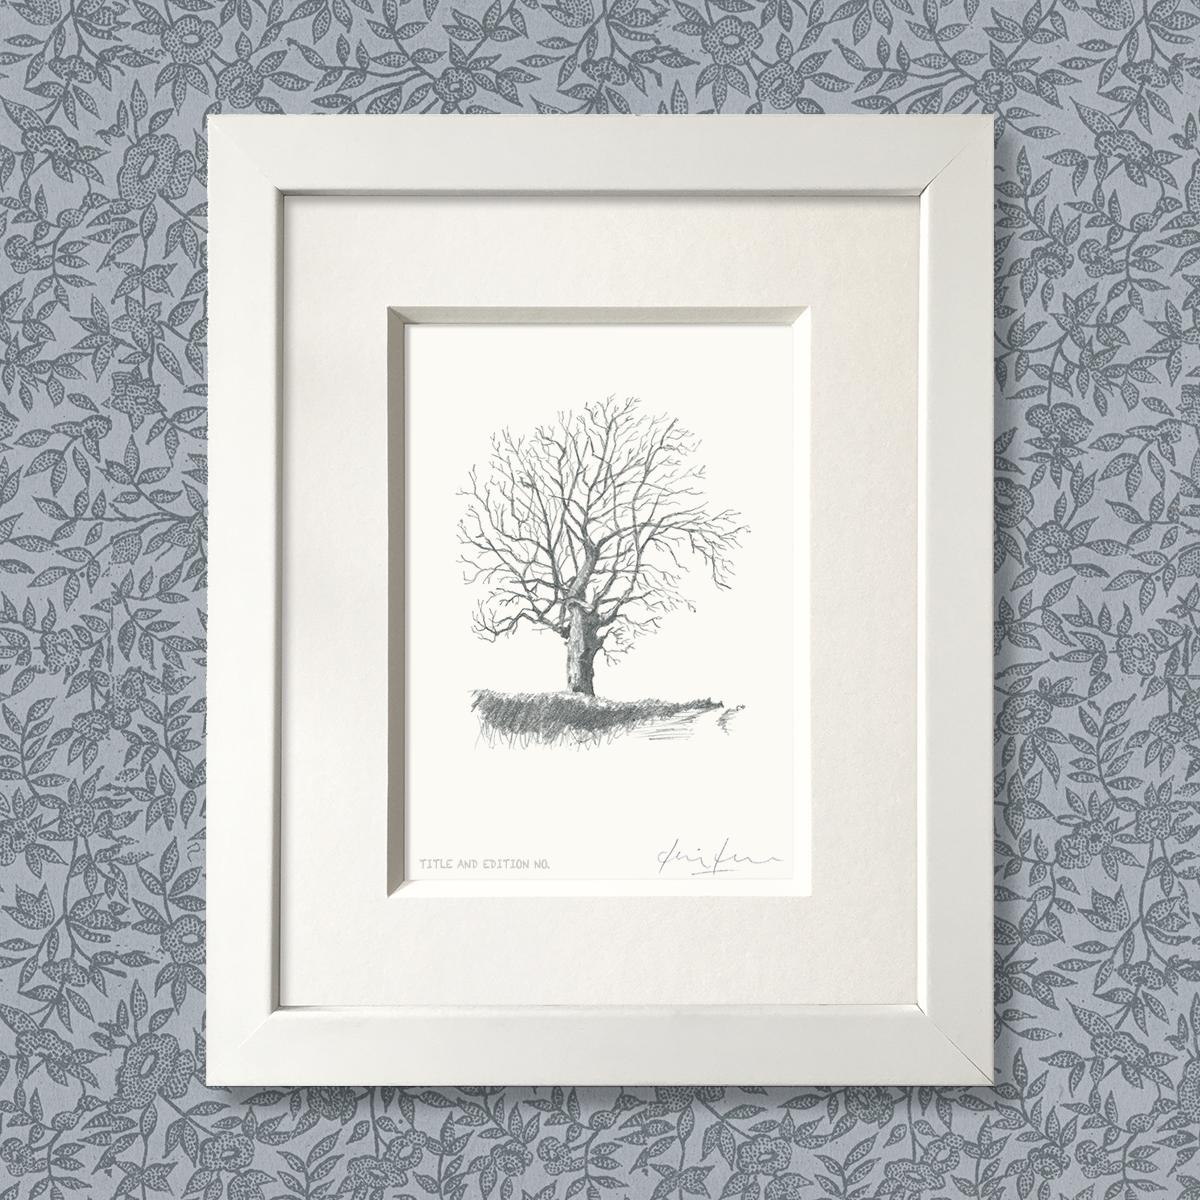 Limited edition print from pencil sketch of a tree in a white frame